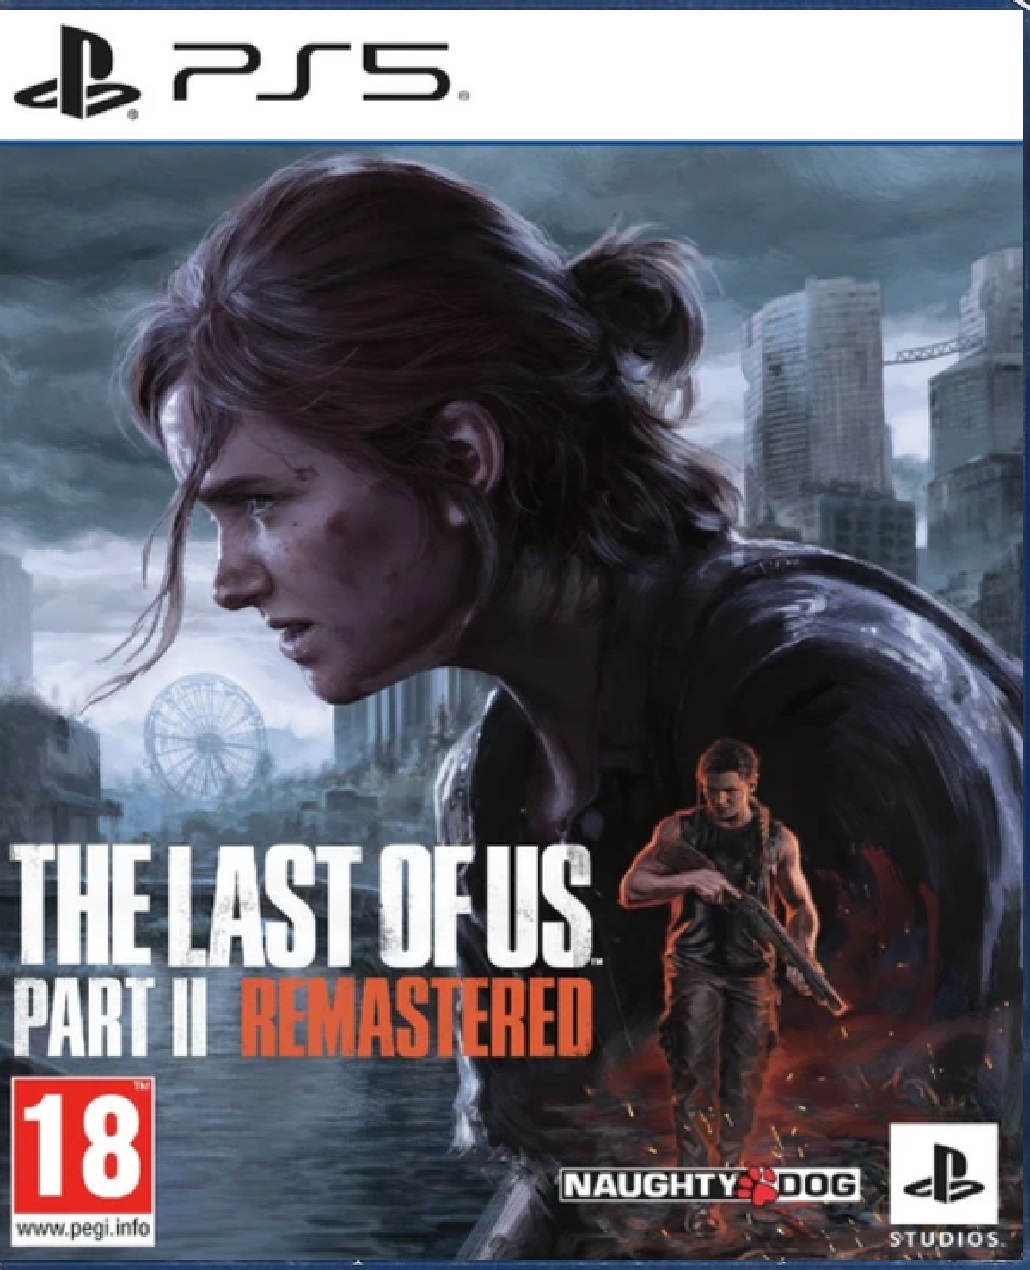 THE LAST OF US PART II - REMASTERED (PS5 - BAZAR)